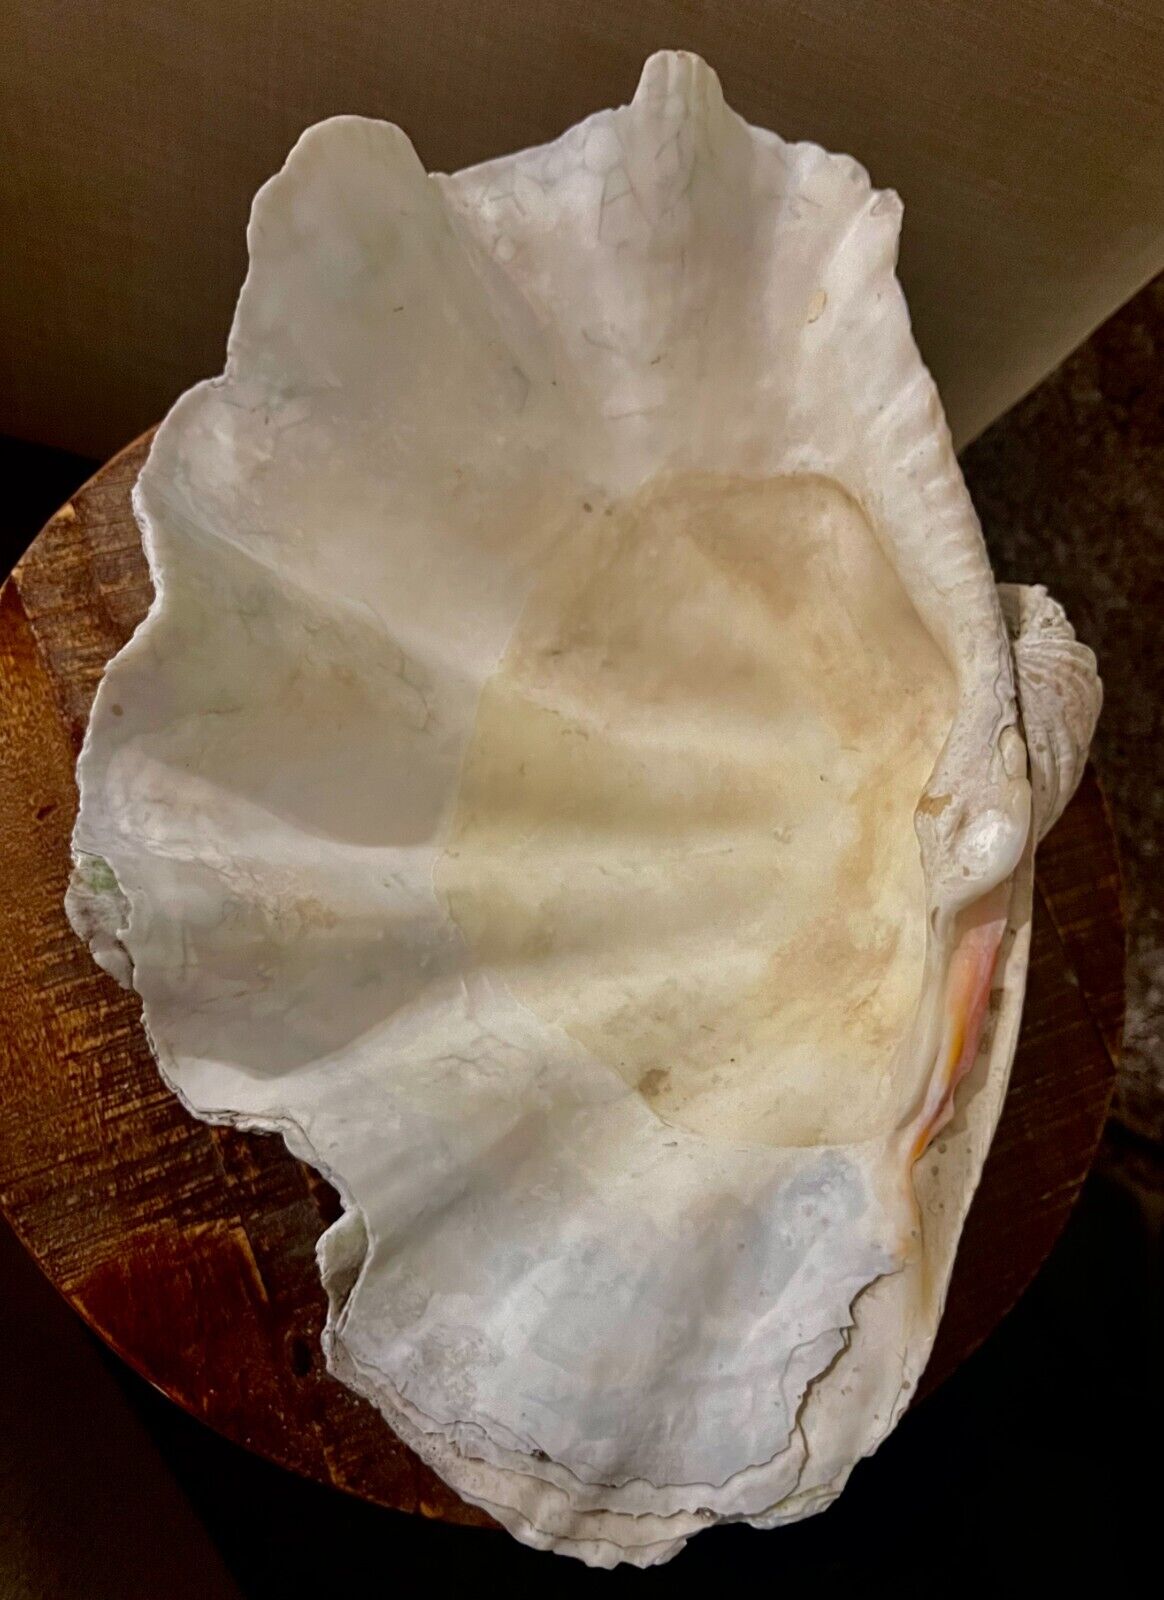 SALE - RARE Stunning \'Tridacna Gigas’ Giant Clam Shell Fossil - 19x13